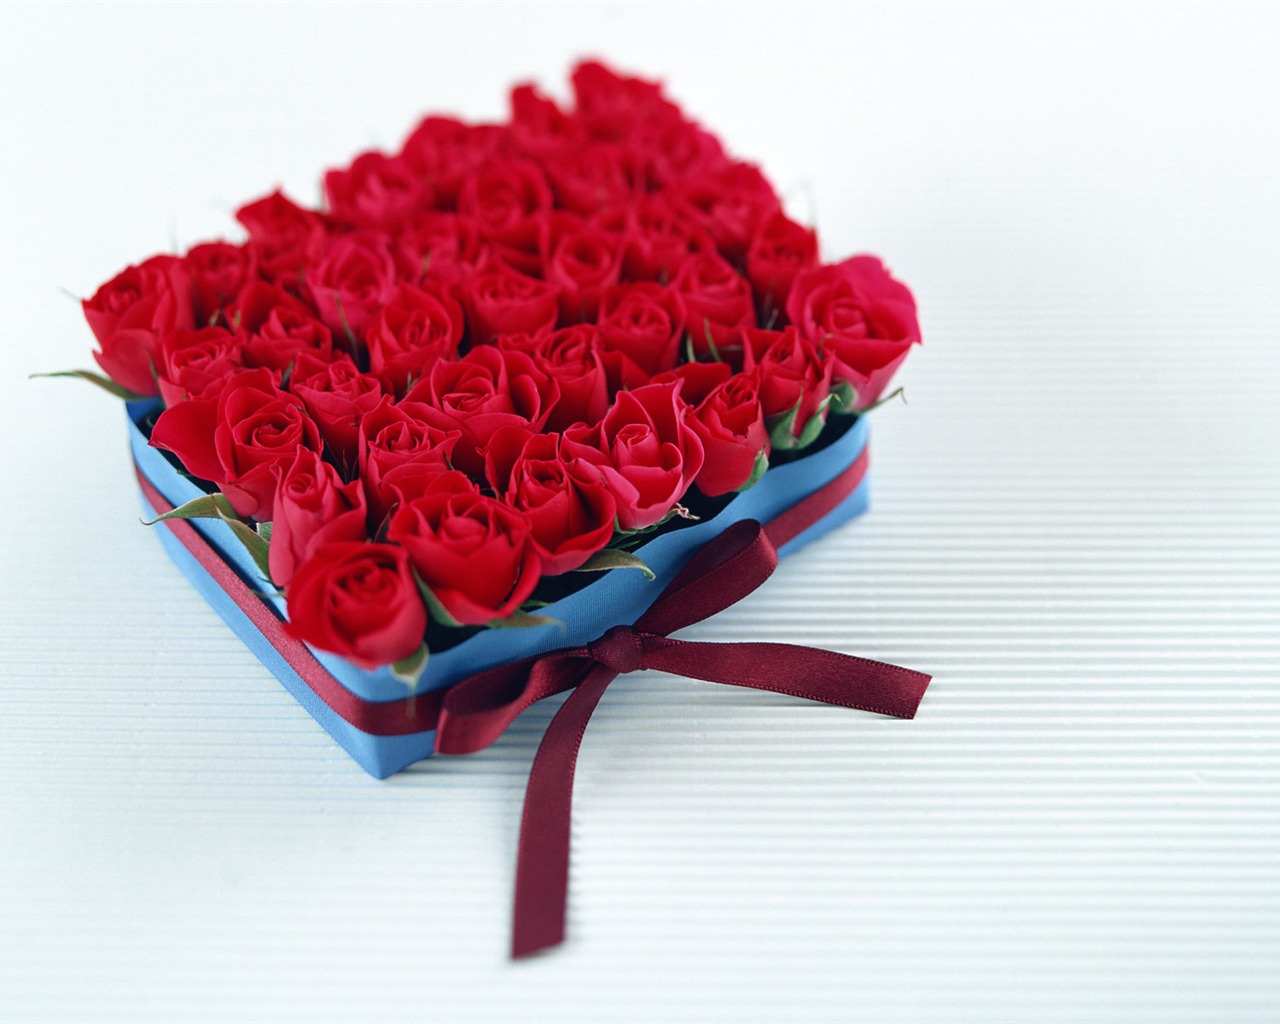 Flowers and gifts wallpaper (1) #13 - 1280x1024